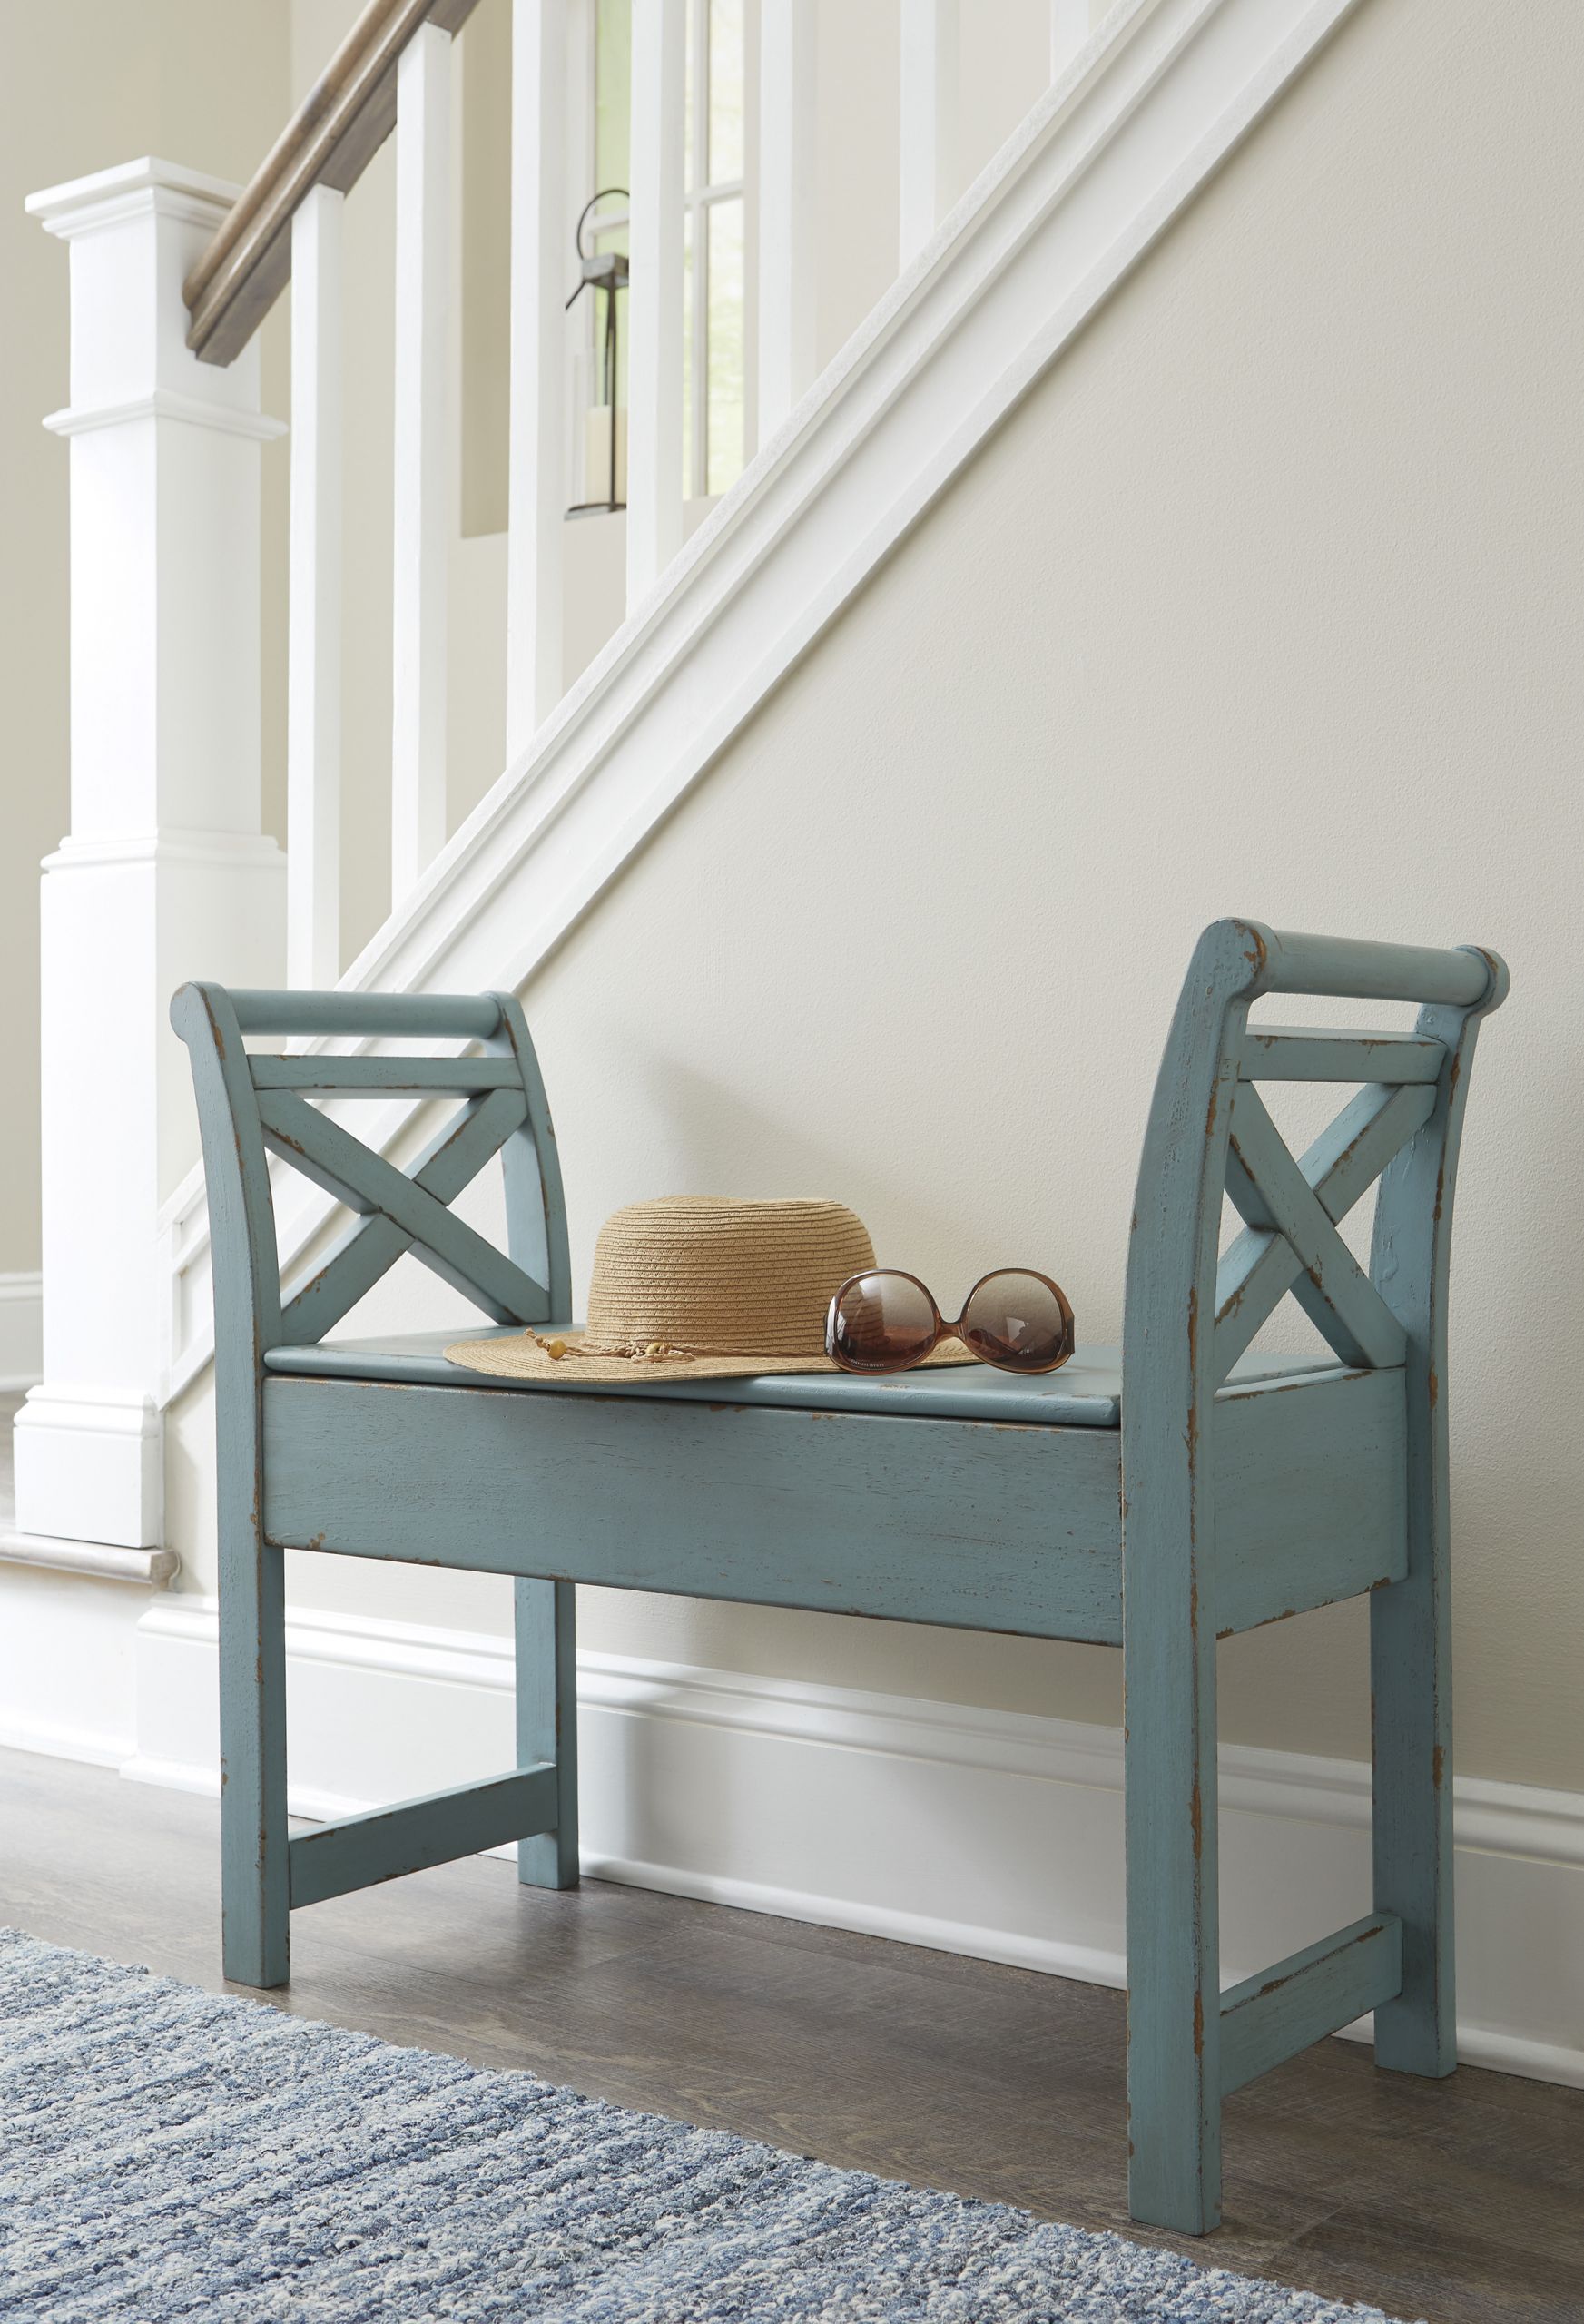 Turquoise Bench With Storage
 Benches Heron Ridge Storage Bench in Turquoise